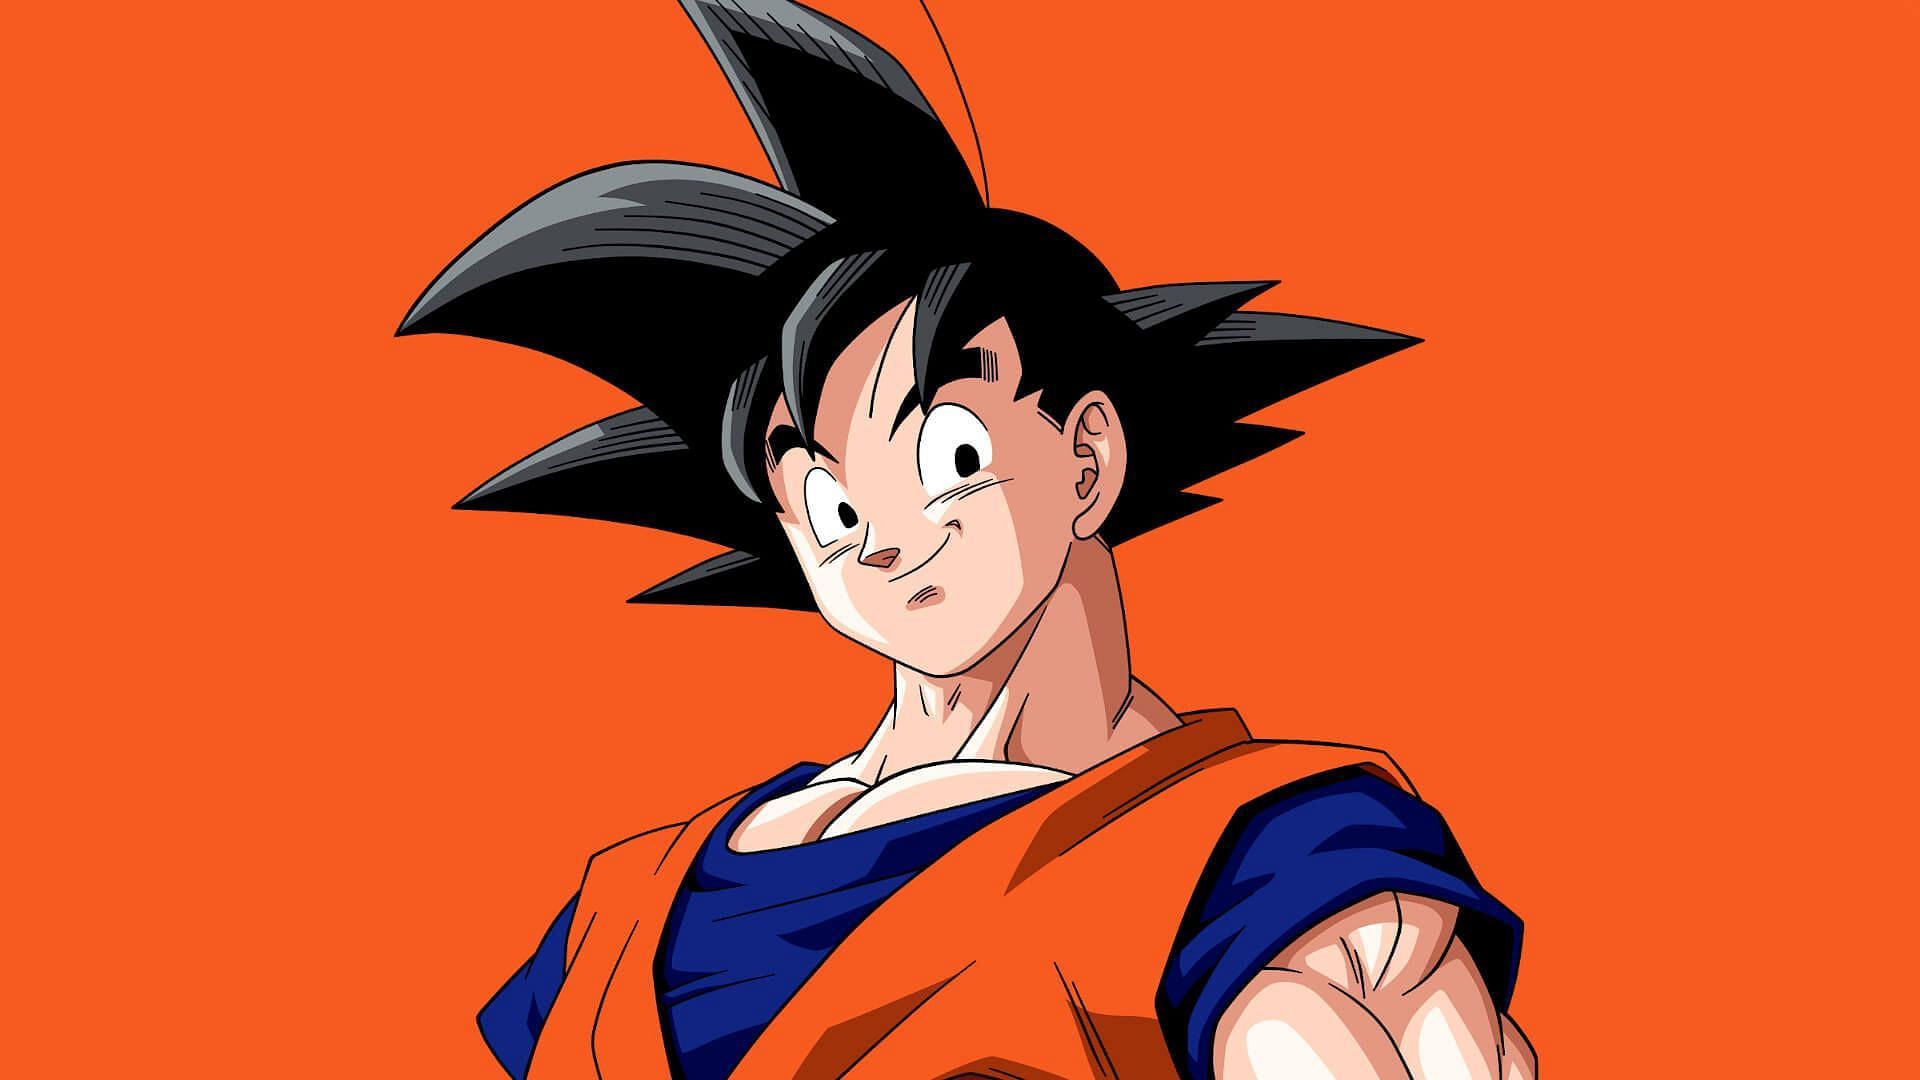 Goku as he appears in the &#039;Dragon Ball Super&#039; anime (Image via Toei Animation)